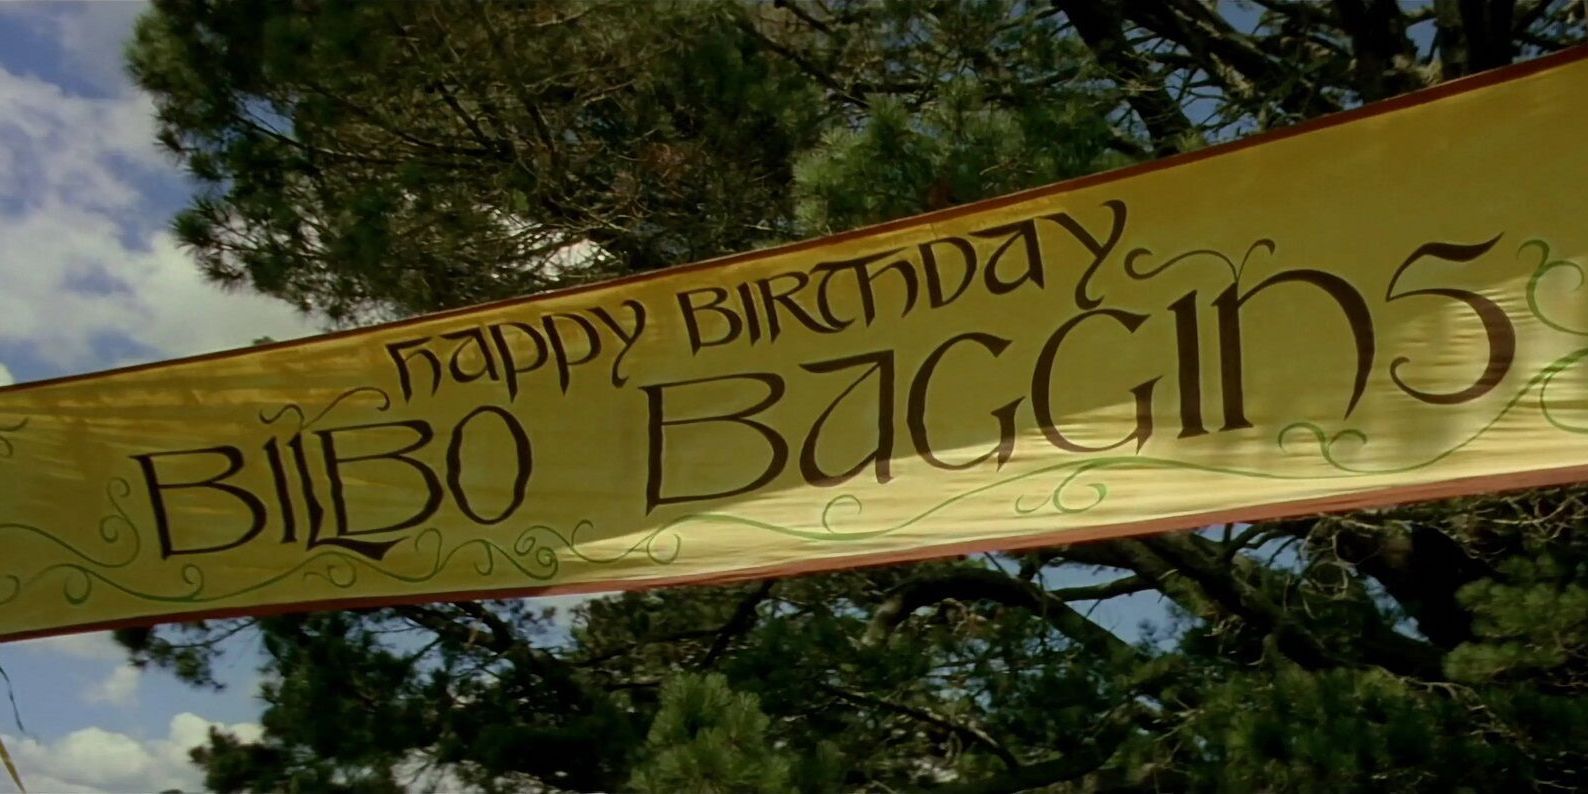 Bilbo Baggins' birthday banner in The Lord of the Rings The Fellowship of the Ring